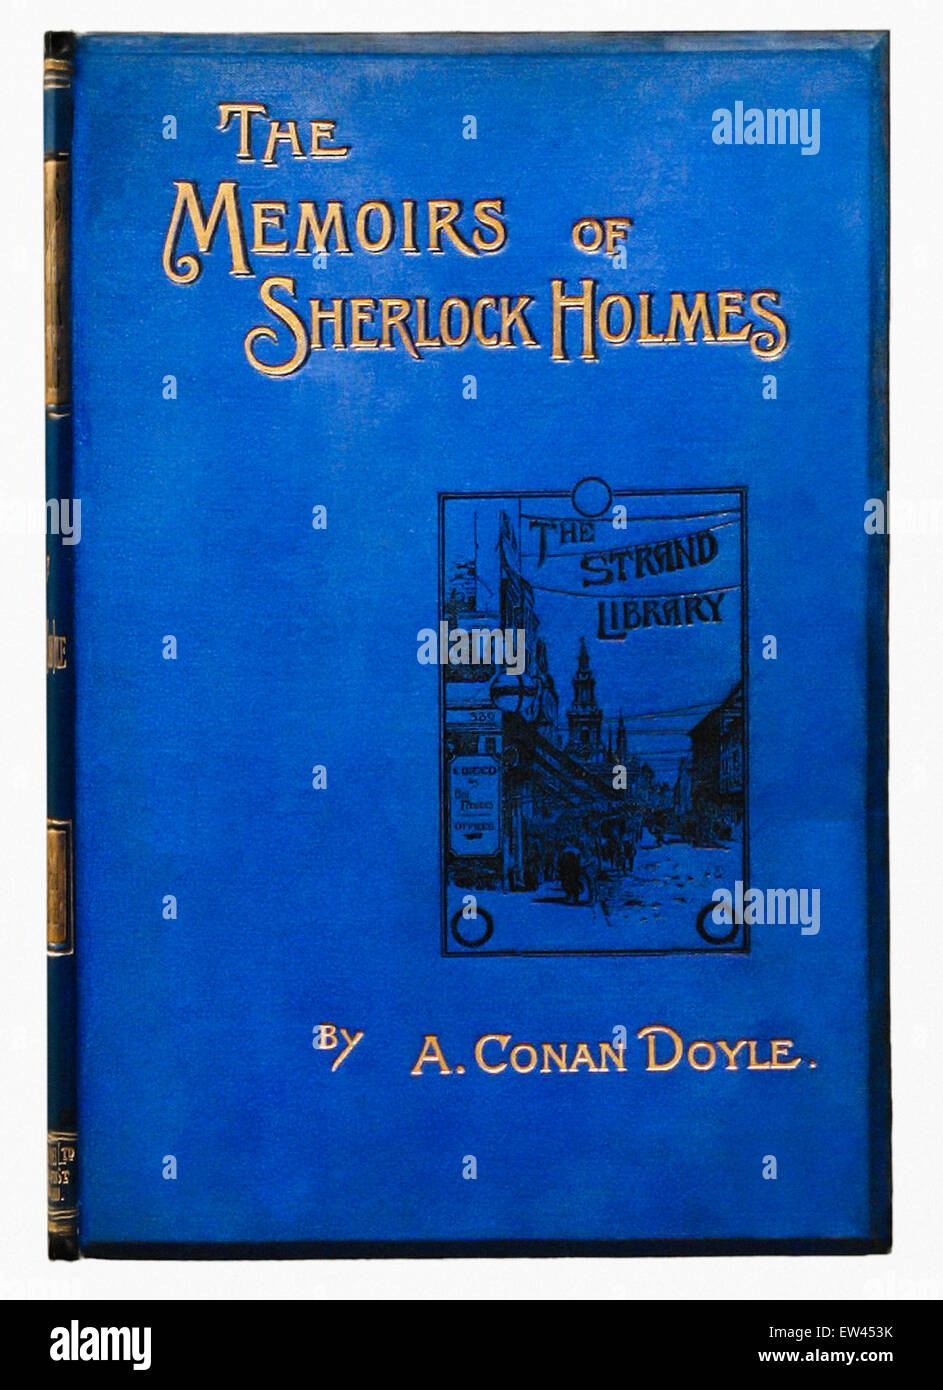 The Memoirs of Sherlock Holmes" Front Cover of first edition published in  1894. The Sherlock Holmes short stories by Arthur Conan Doyle were first  published in The Strand magazine with illustrations by